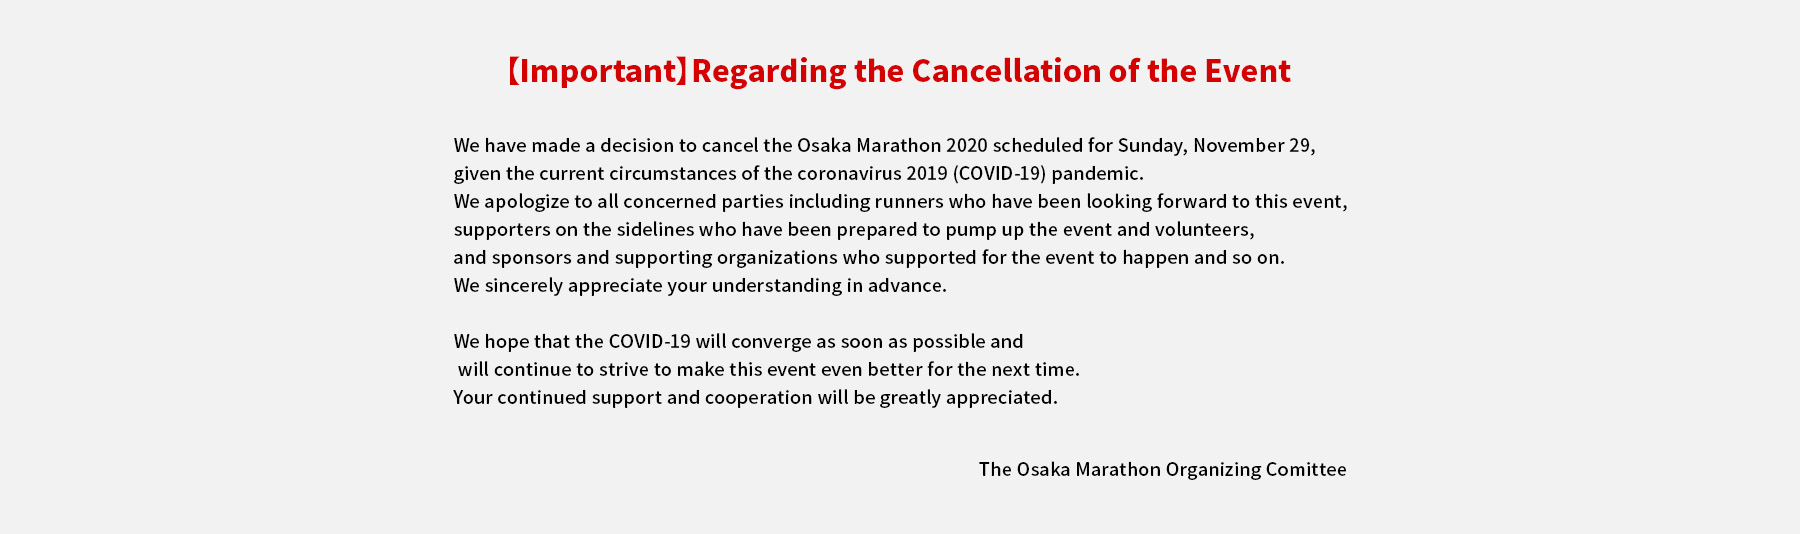 Regarding the postponement of the opening date for race applications